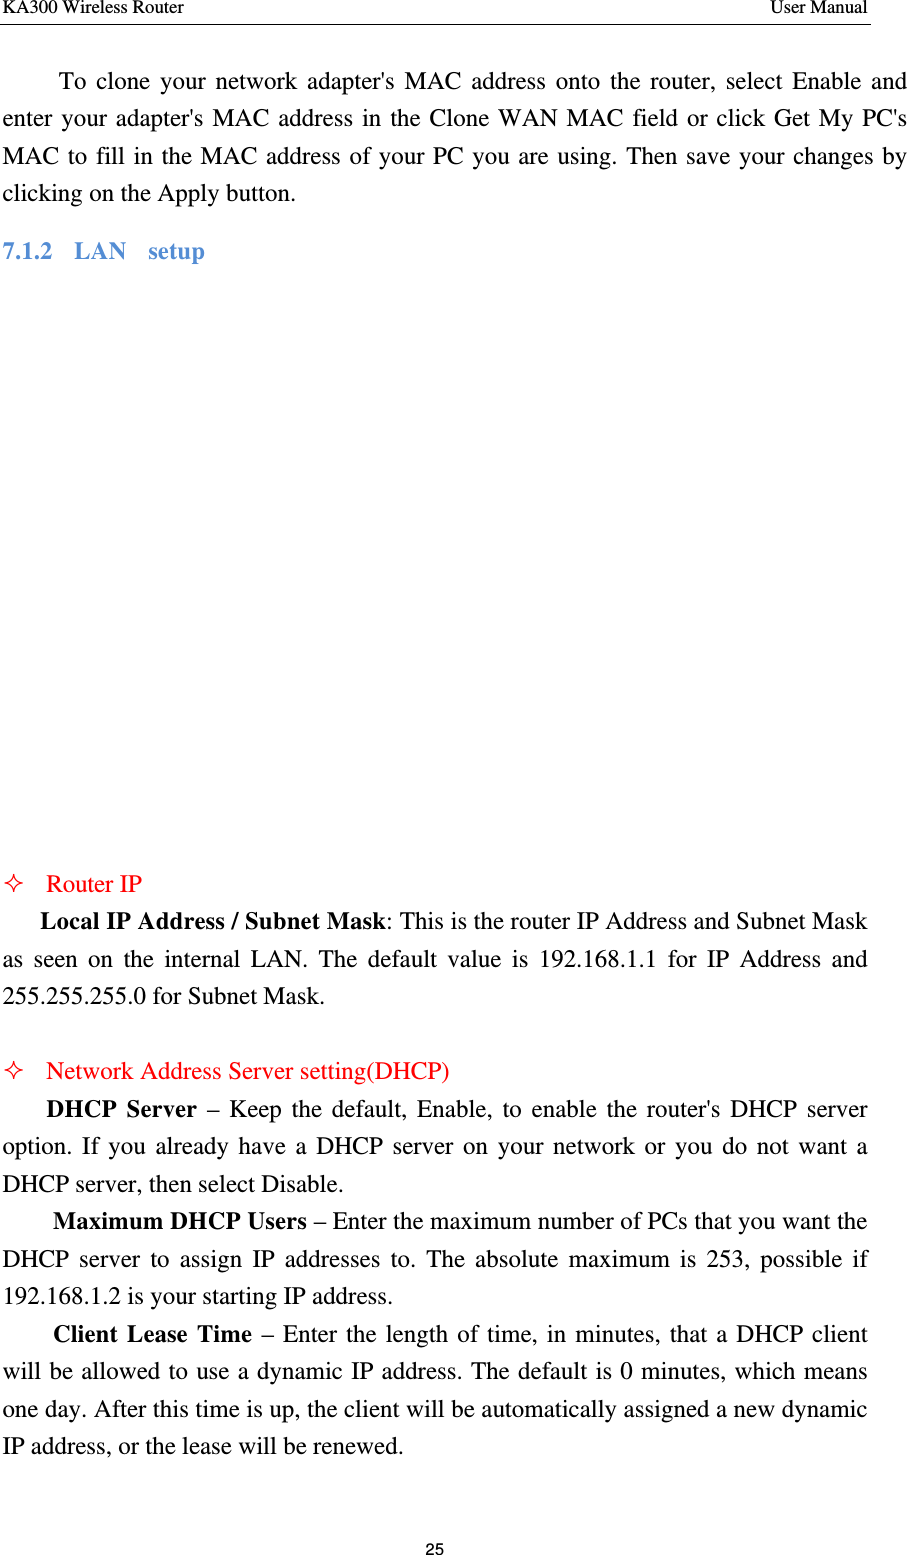 KA300 Wireless Router       User Manual 25        To clone your network adapter&apos;s MAC address onto the router, select Enable and enter your adapter&apos;s MAC address in the Clone WAN MAC field or click Get My PC&apos;s MAC to fill in the MAC address of your PC you are using. Then save your changes by clicking on the Apply button. 7.1.2   LAN  setup 　 ² Router IP Local IP Address / Subnet Mask: This is the router IP Address and Subnet Mask as seen on the internal LAN. The default value is 192.168.1.1 for IP Address and 255.255.255.0 for Subnet Mask.  ² Network Address Server setting(DHCP)     DHCP Server – Keep the default, Enable, to enable the router&apos;s DHCP server option. If you already have a DHCP server on your network or you do not want a DHCP server, then select Disable. Maximum DHCP Users – Enter the maximum number of PCs that you want the DHCP server to assign IP addresses to. The absolute maximum is 253, possible if 192.168.1.2 is your starting IP address. Client Lease Time – Enter the length of time, in minutes, that a DHCP client will be allowed to use a dynamic IP address. The default is 0 minutes, which means one day. After this time is up, the client will be automatically assigned a new dynamic IP address, or the lease will be renewed.   